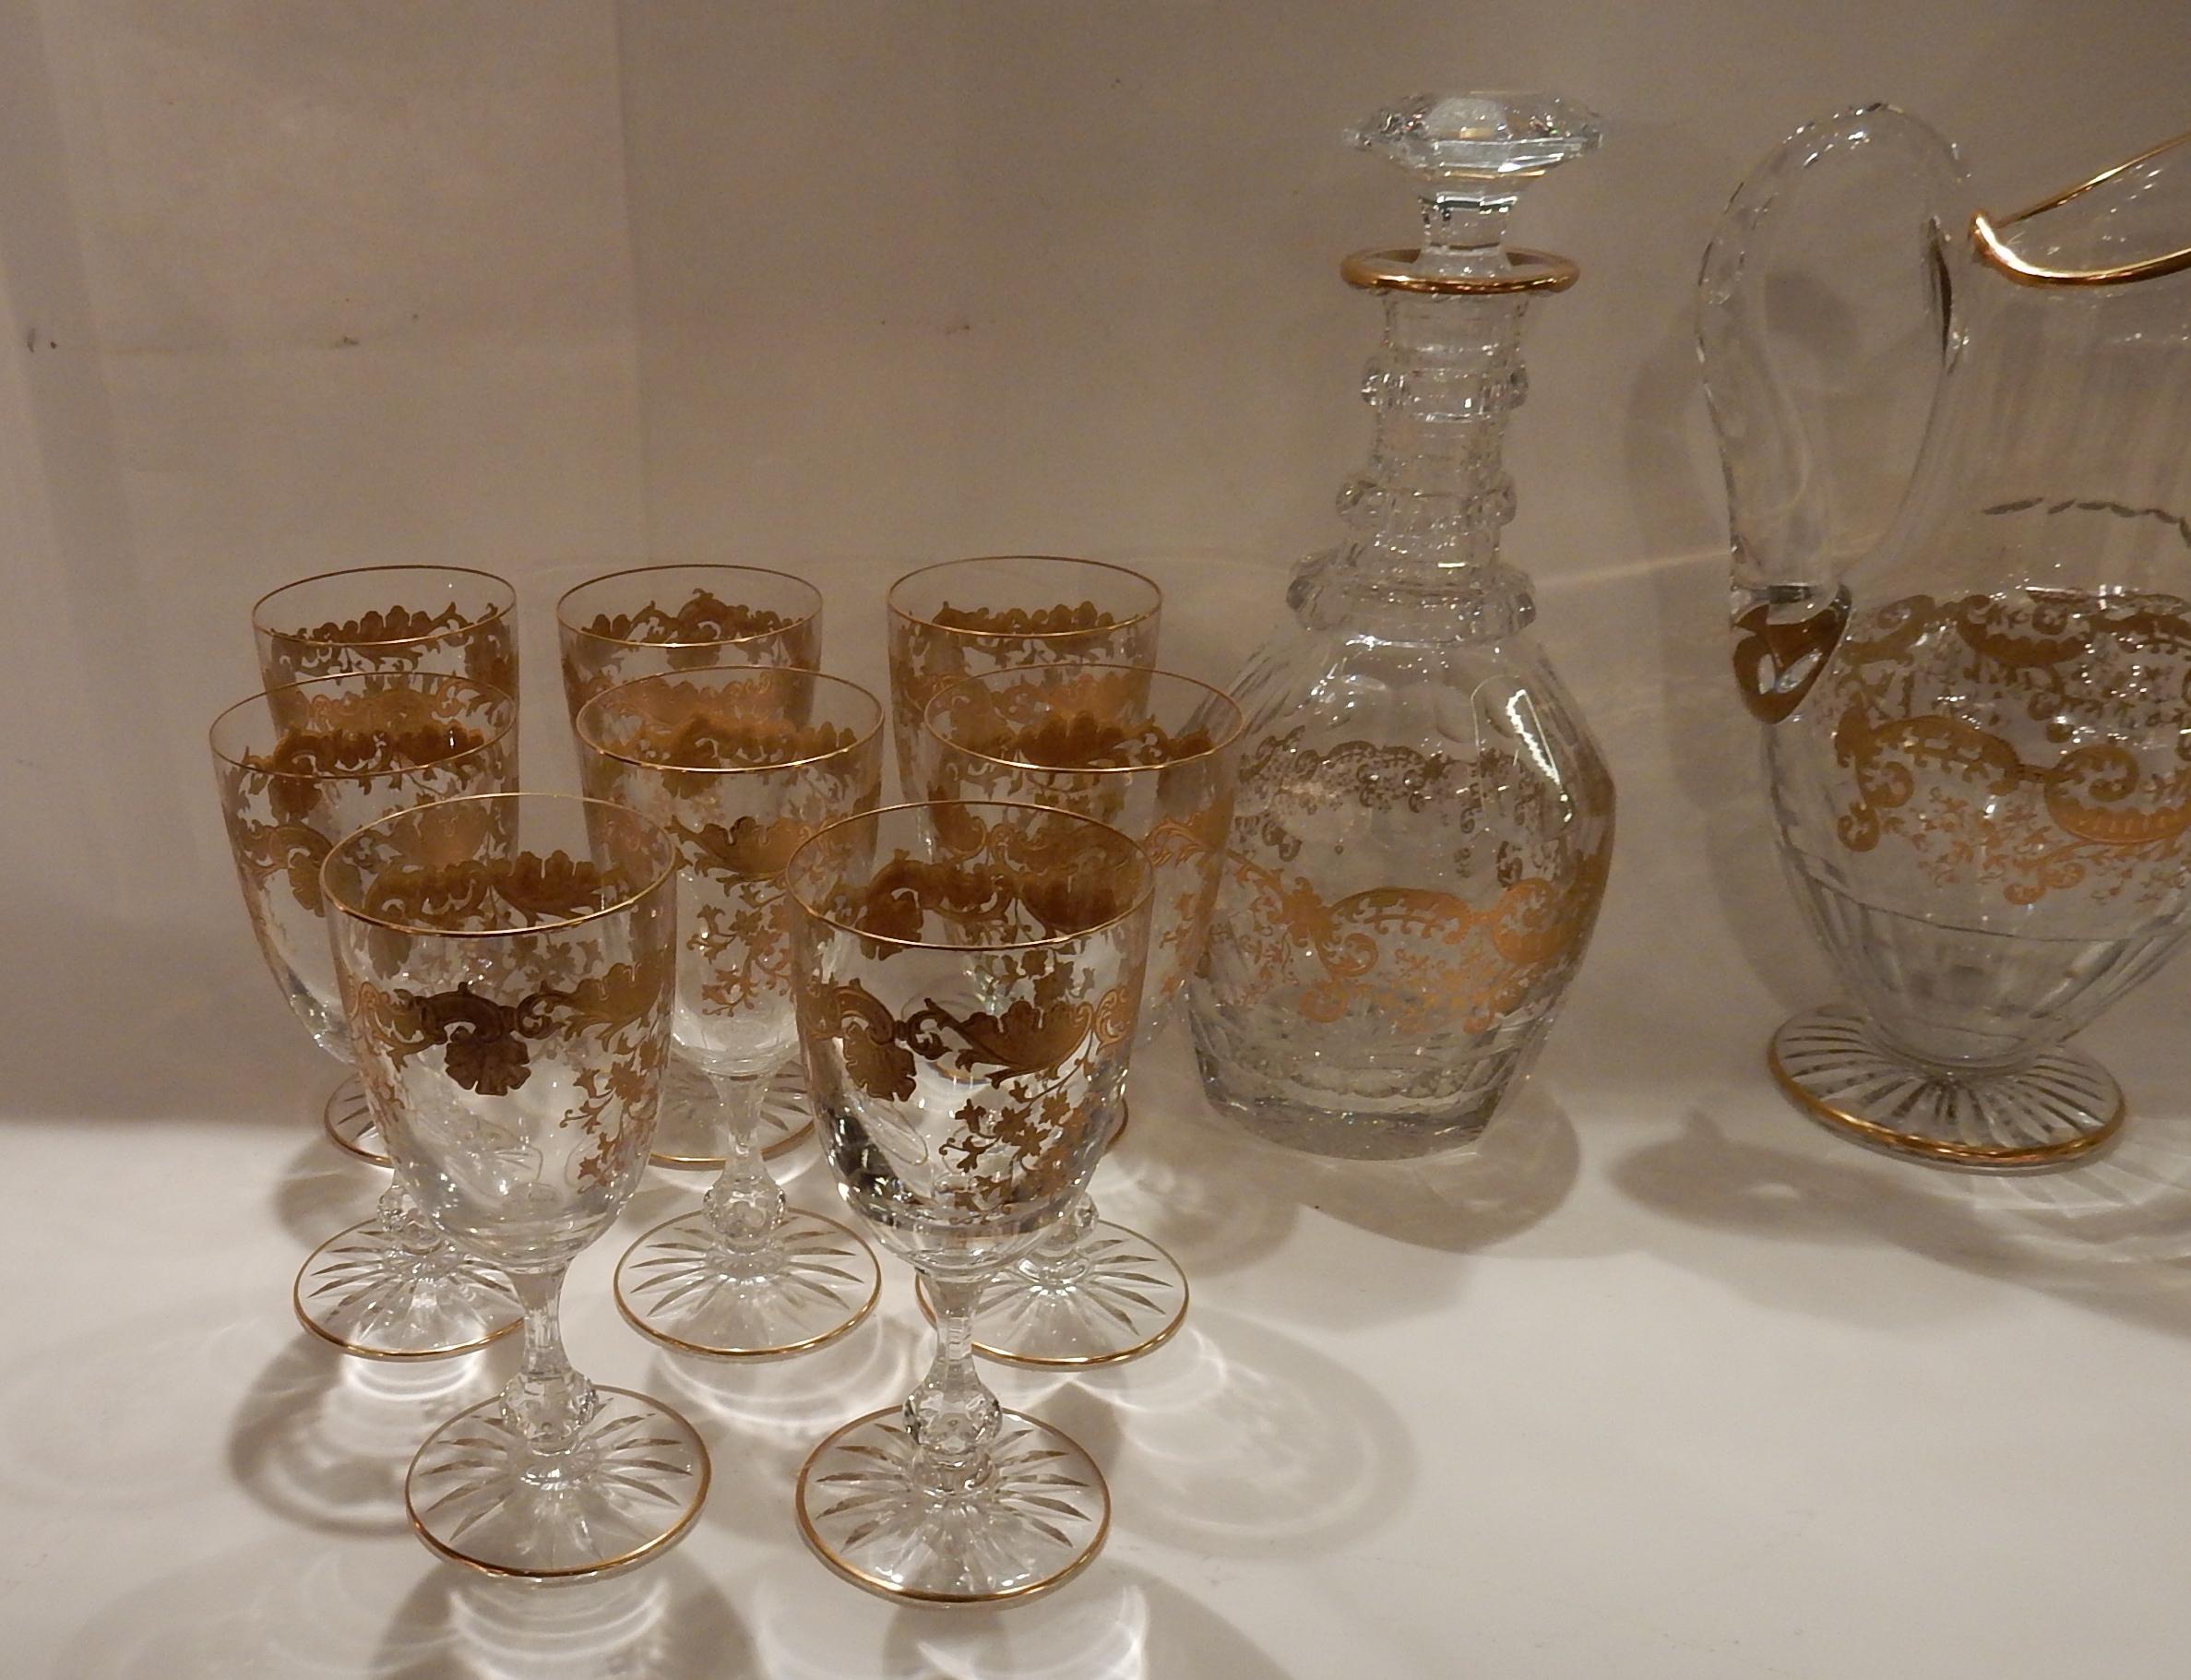 1950 Crystal Serveware From St Louis Trianon 22 Piéces Signed 6